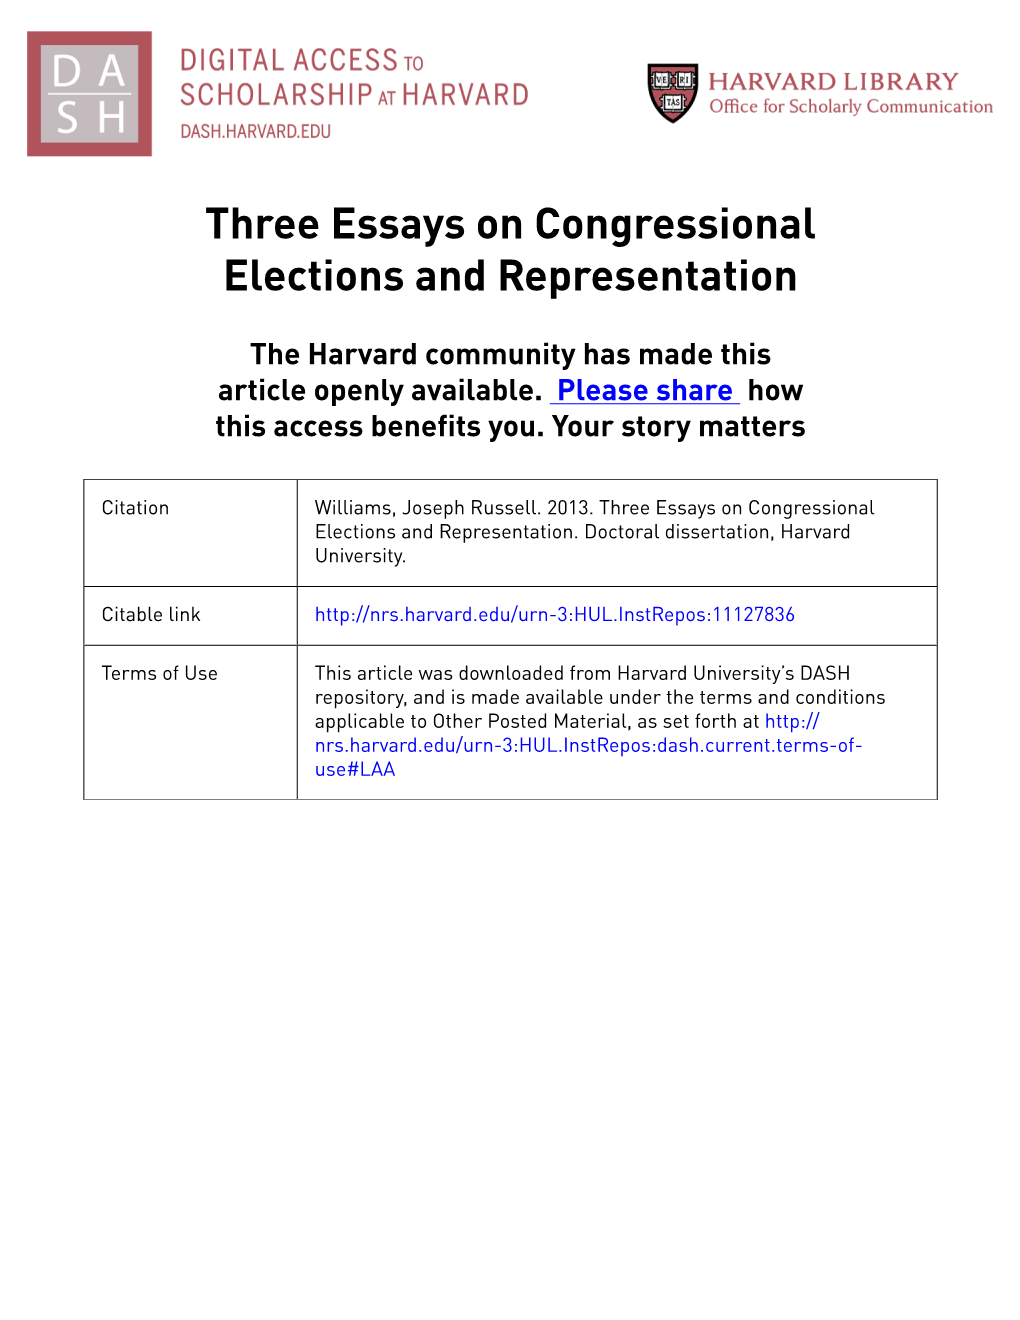 Three Essays on Congressional Elections and Representation